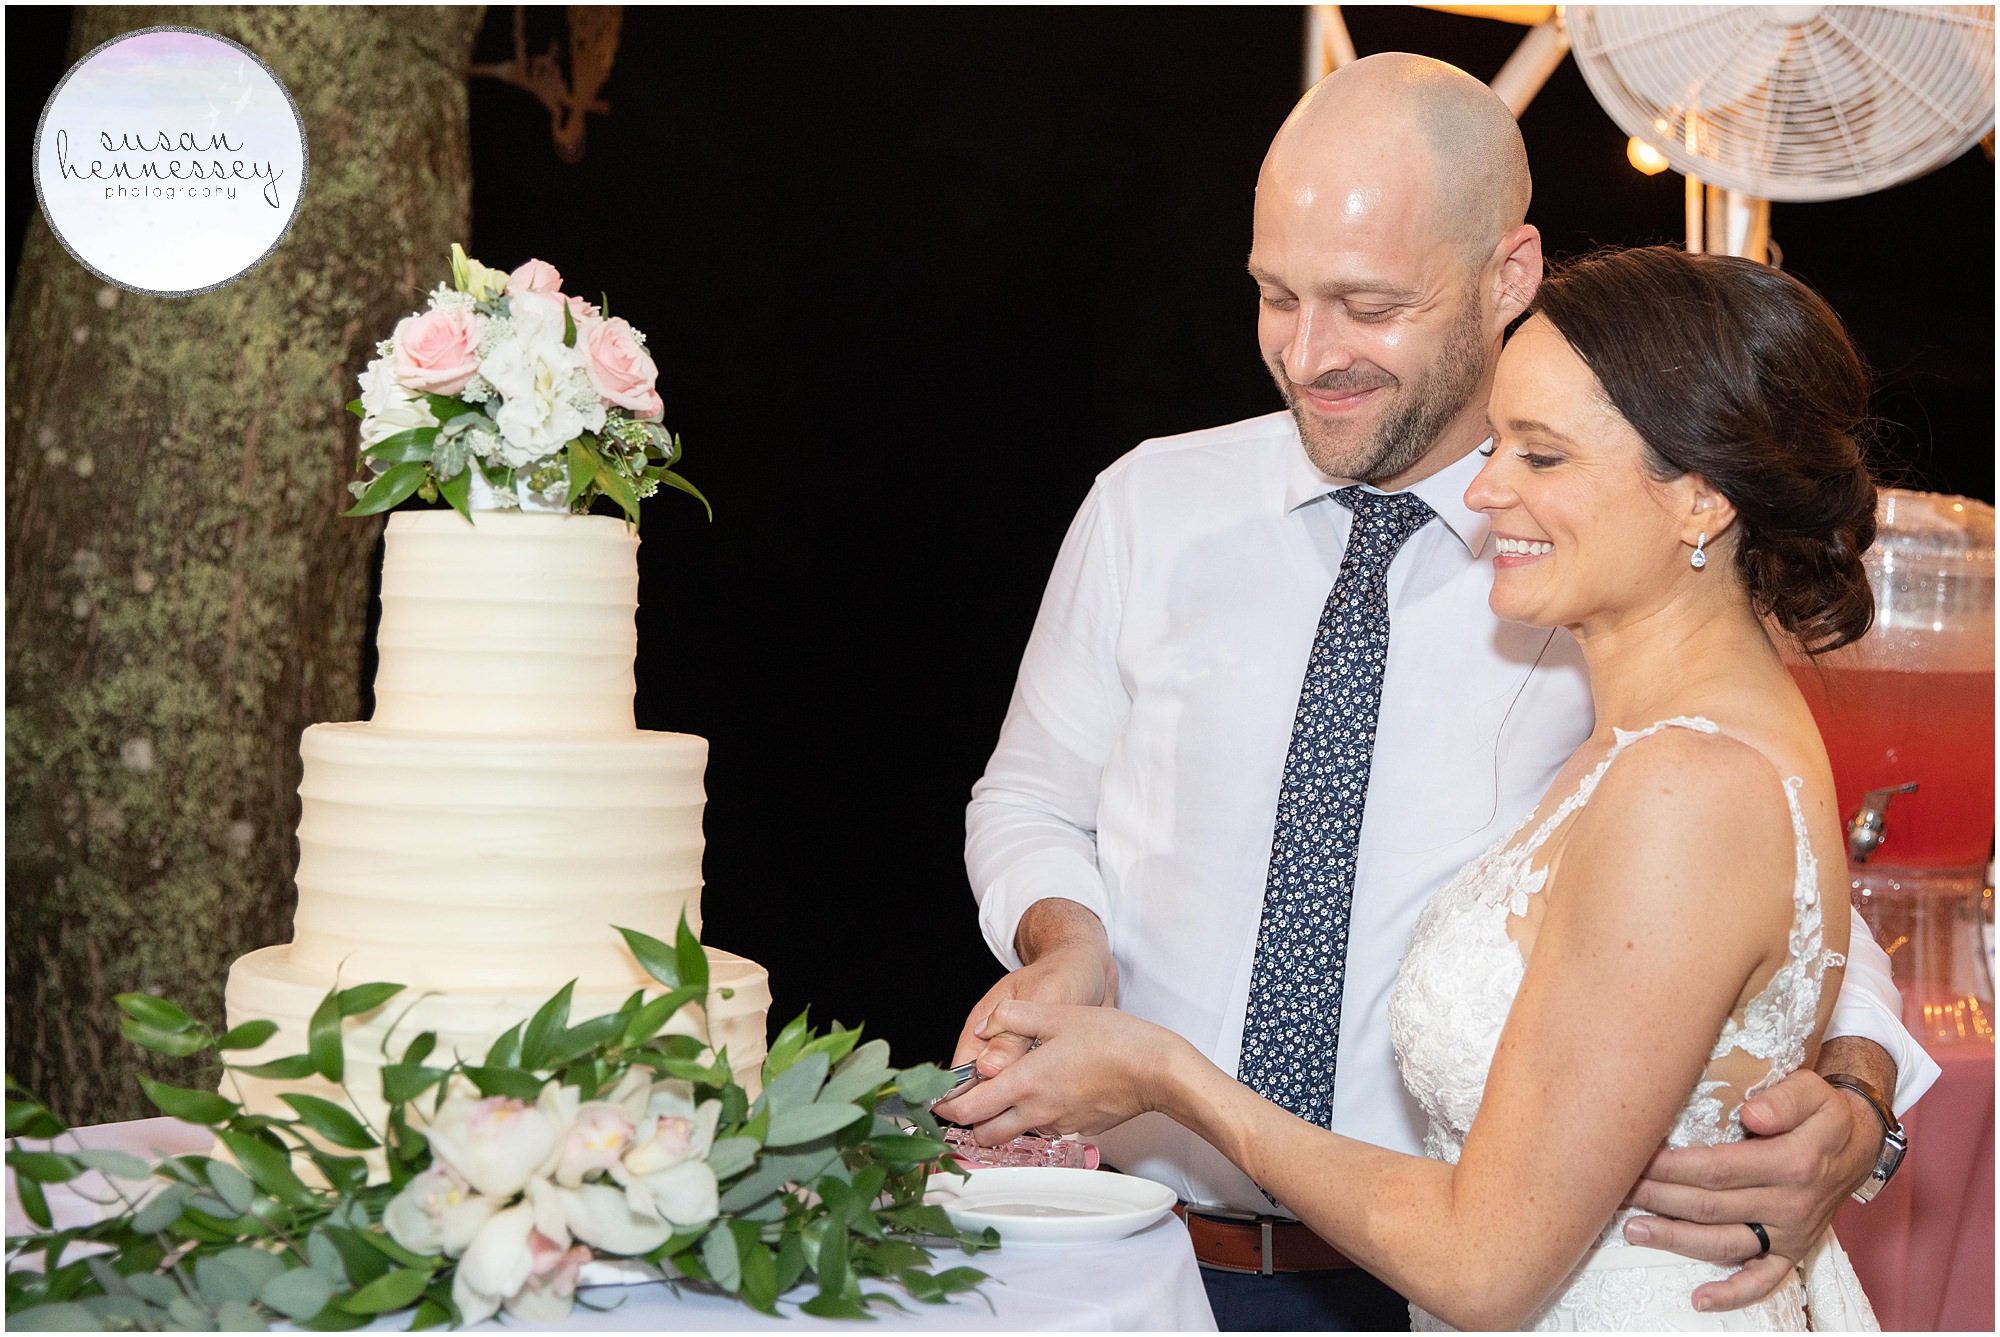 Bride and groom cut the cake at outdoor backyard wedding